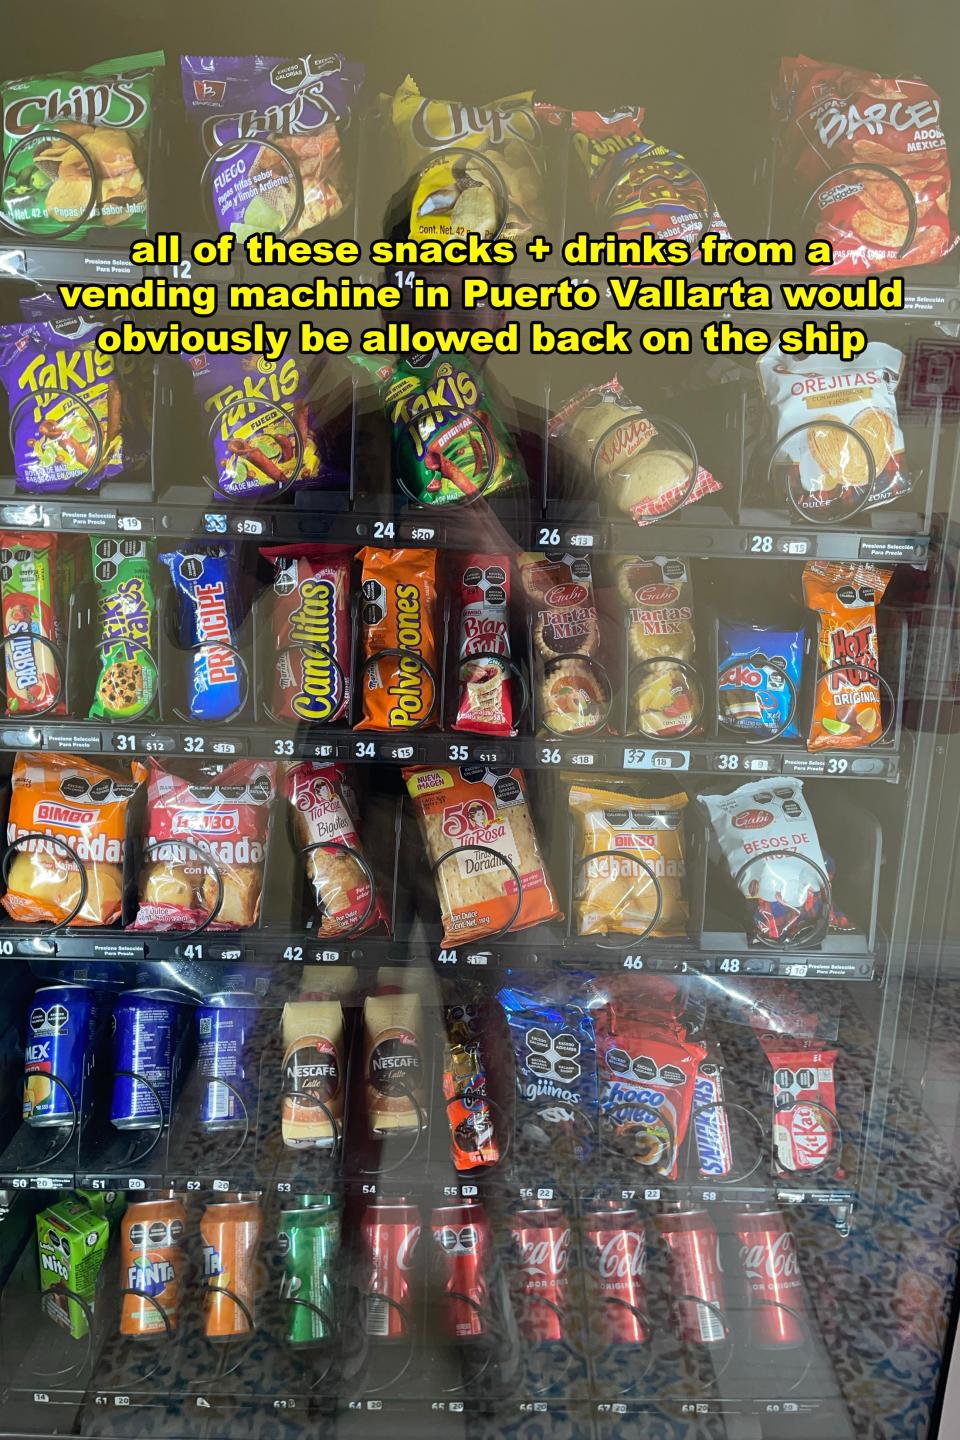 Vending machine filled with various snacks and drinks with a handwritten sign about Puerto Vallarta